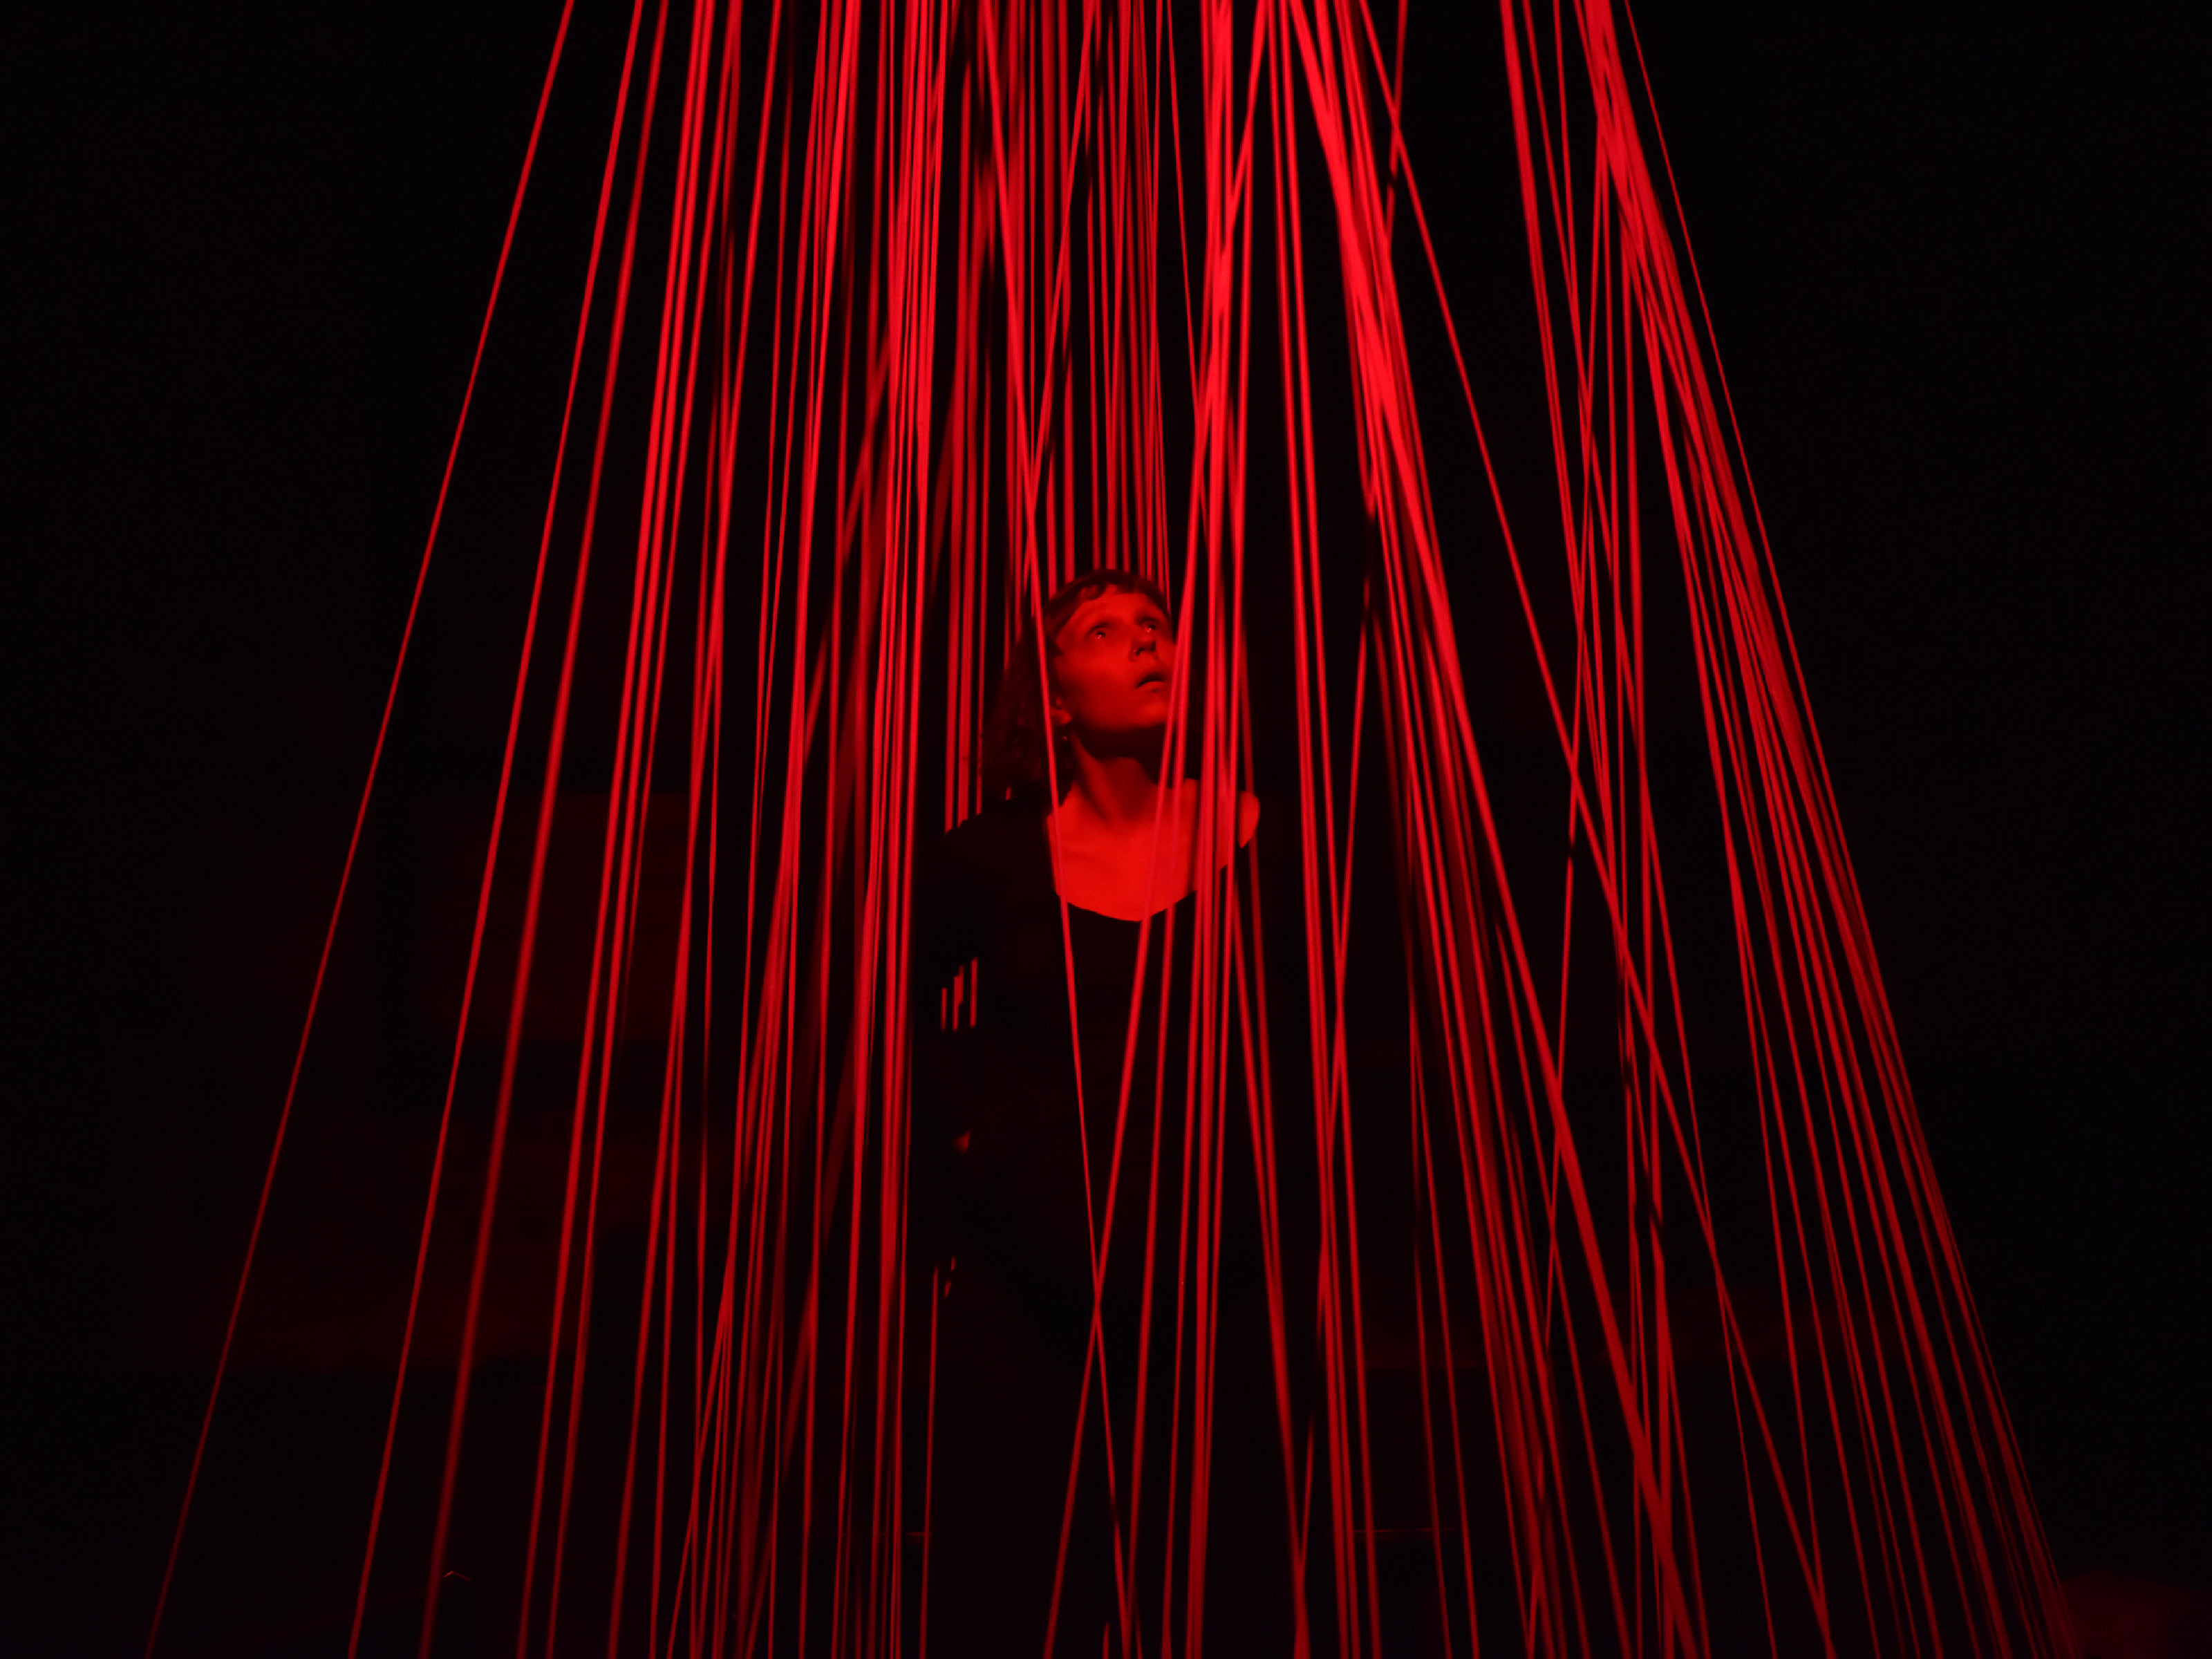 A performer dressed in black stands between numerous thick cords leading from the floor to the ceiling with an astonished expression on her face and her eyes fixed on the ceiling. The entire scene is bathed in red light.